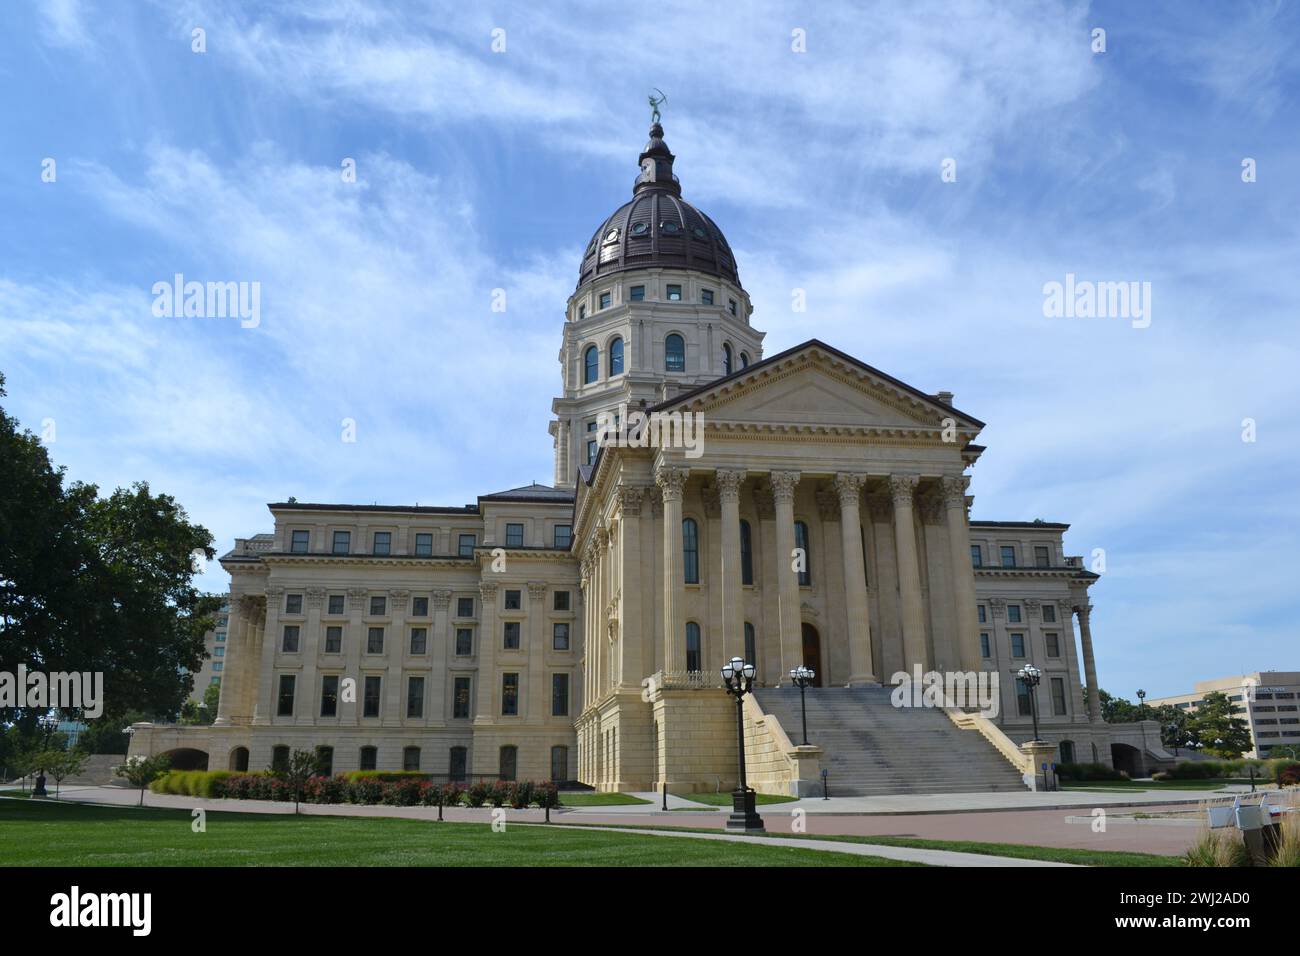 Kansas Statehouse with Beautiful Tall Dome in the Capitol City Topeka Stock Photo